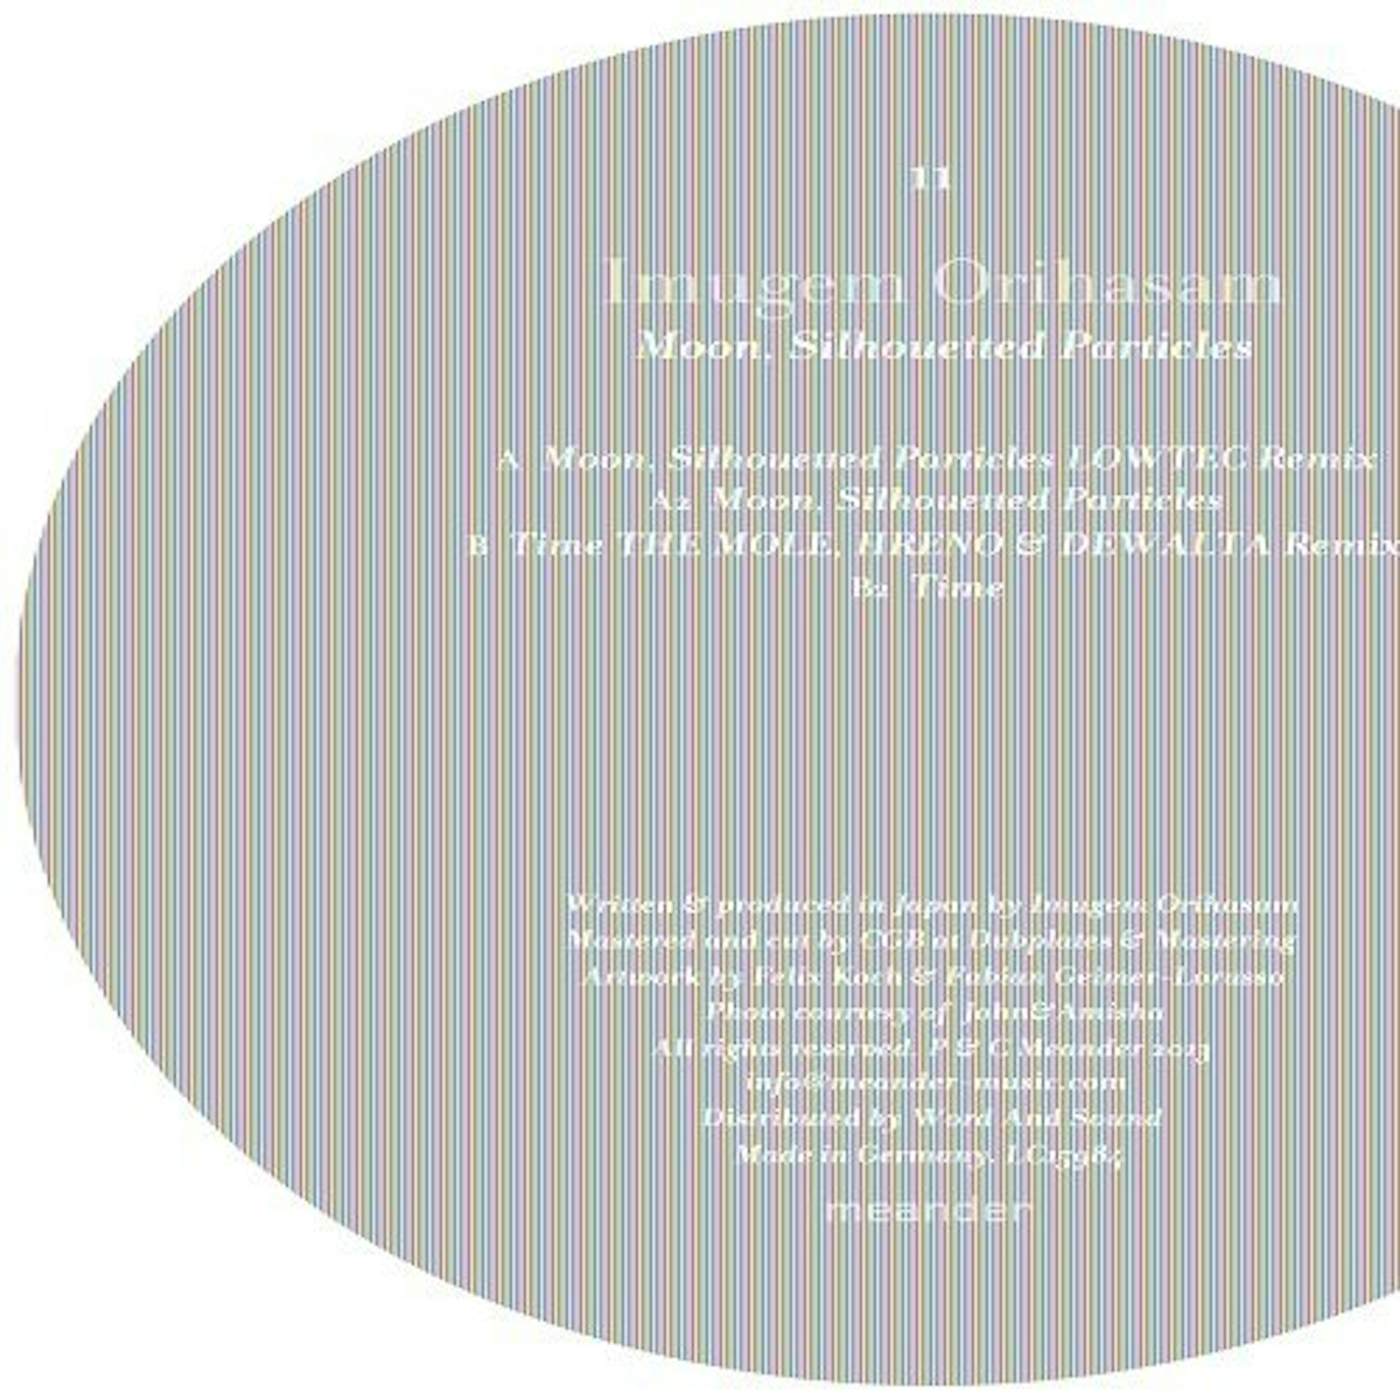 Imugem Orihasam MOON SILHOUETTED PARTICLES Vinyl Record